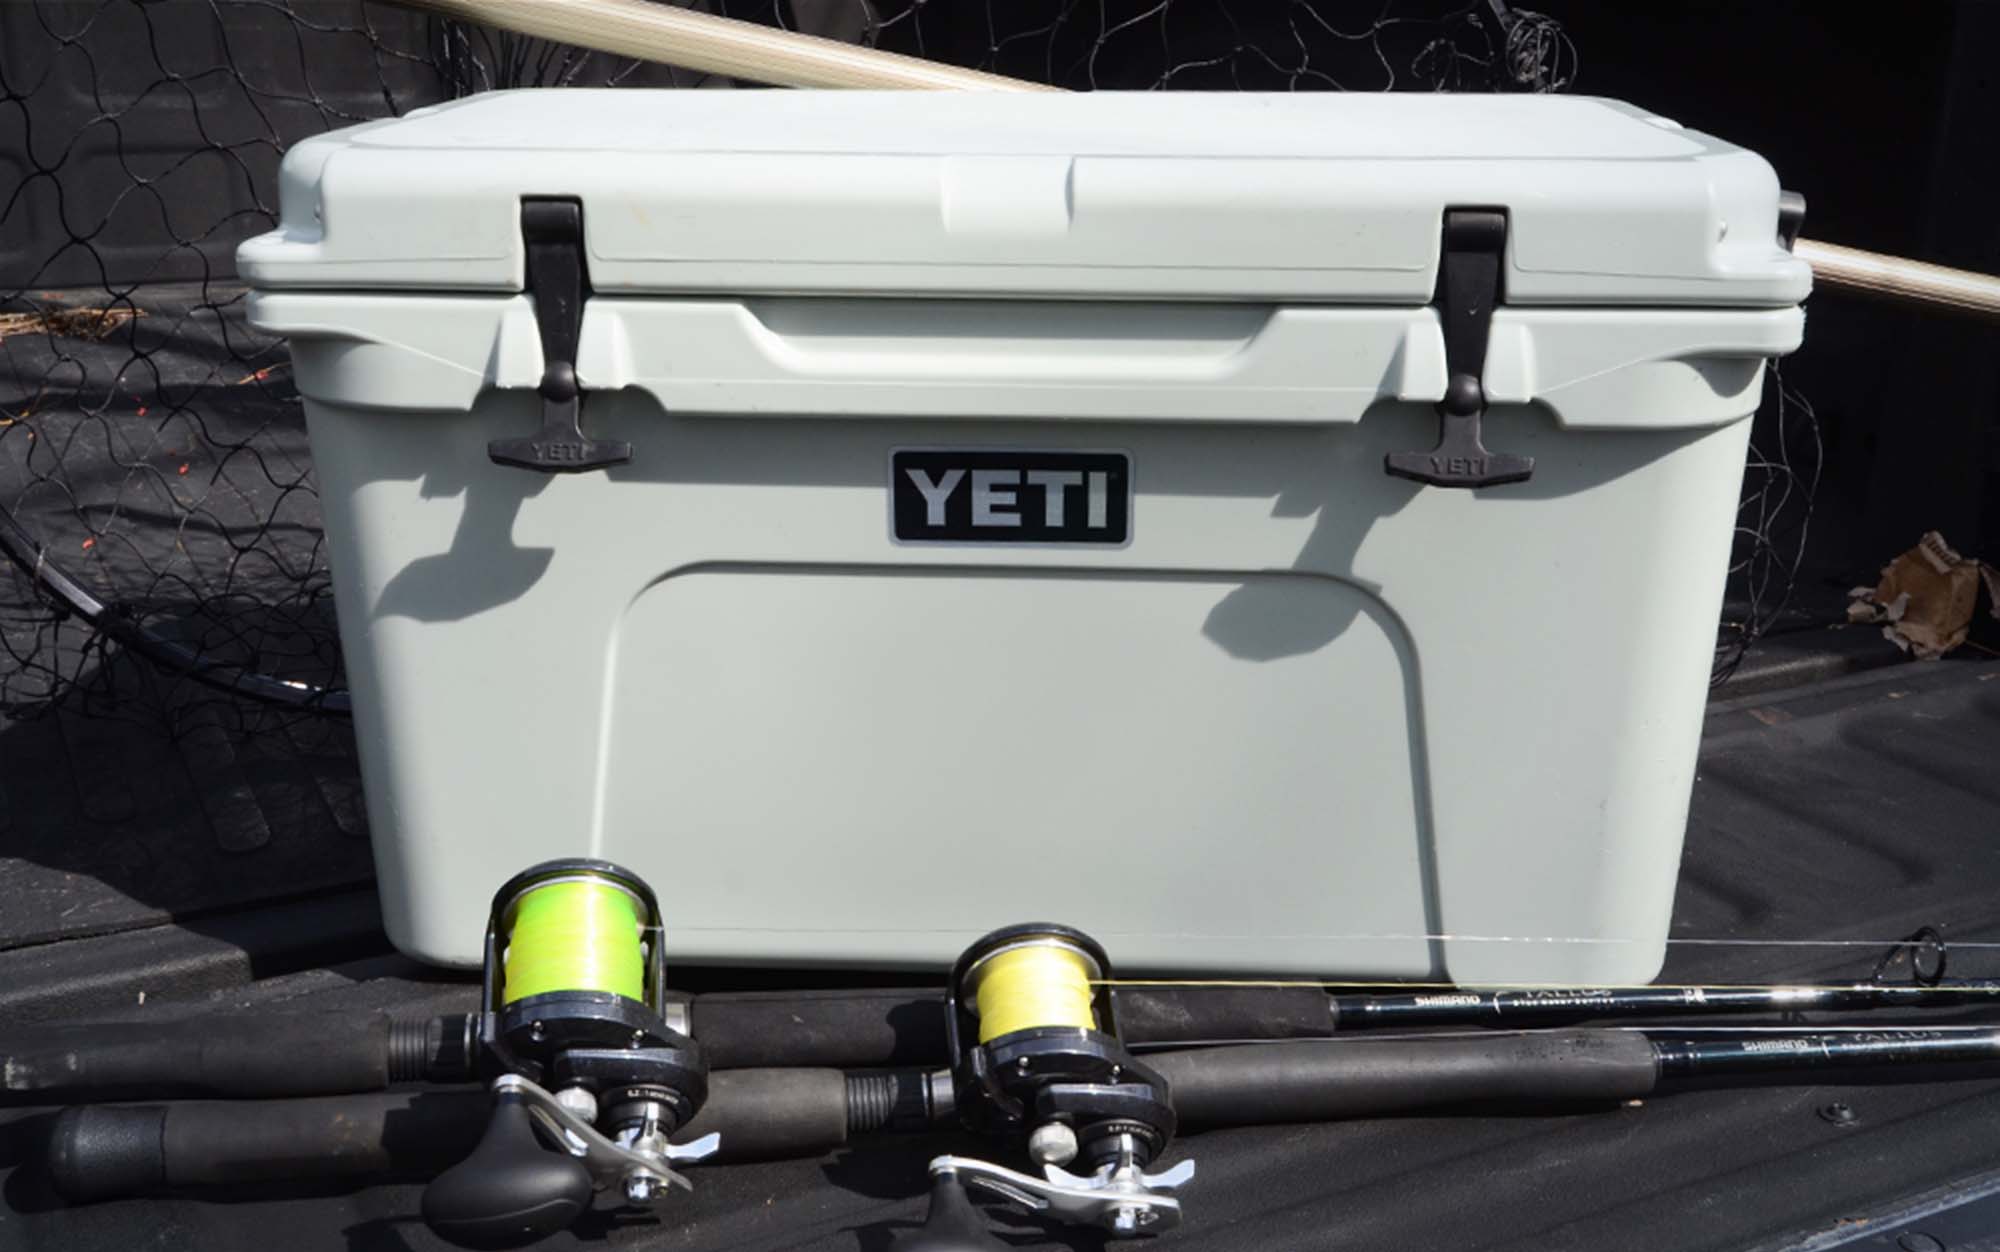 YETI COOLER REVIEW - Is the expensive YETI Tundra 45 Cooler Worth The Cost?  [2021] 